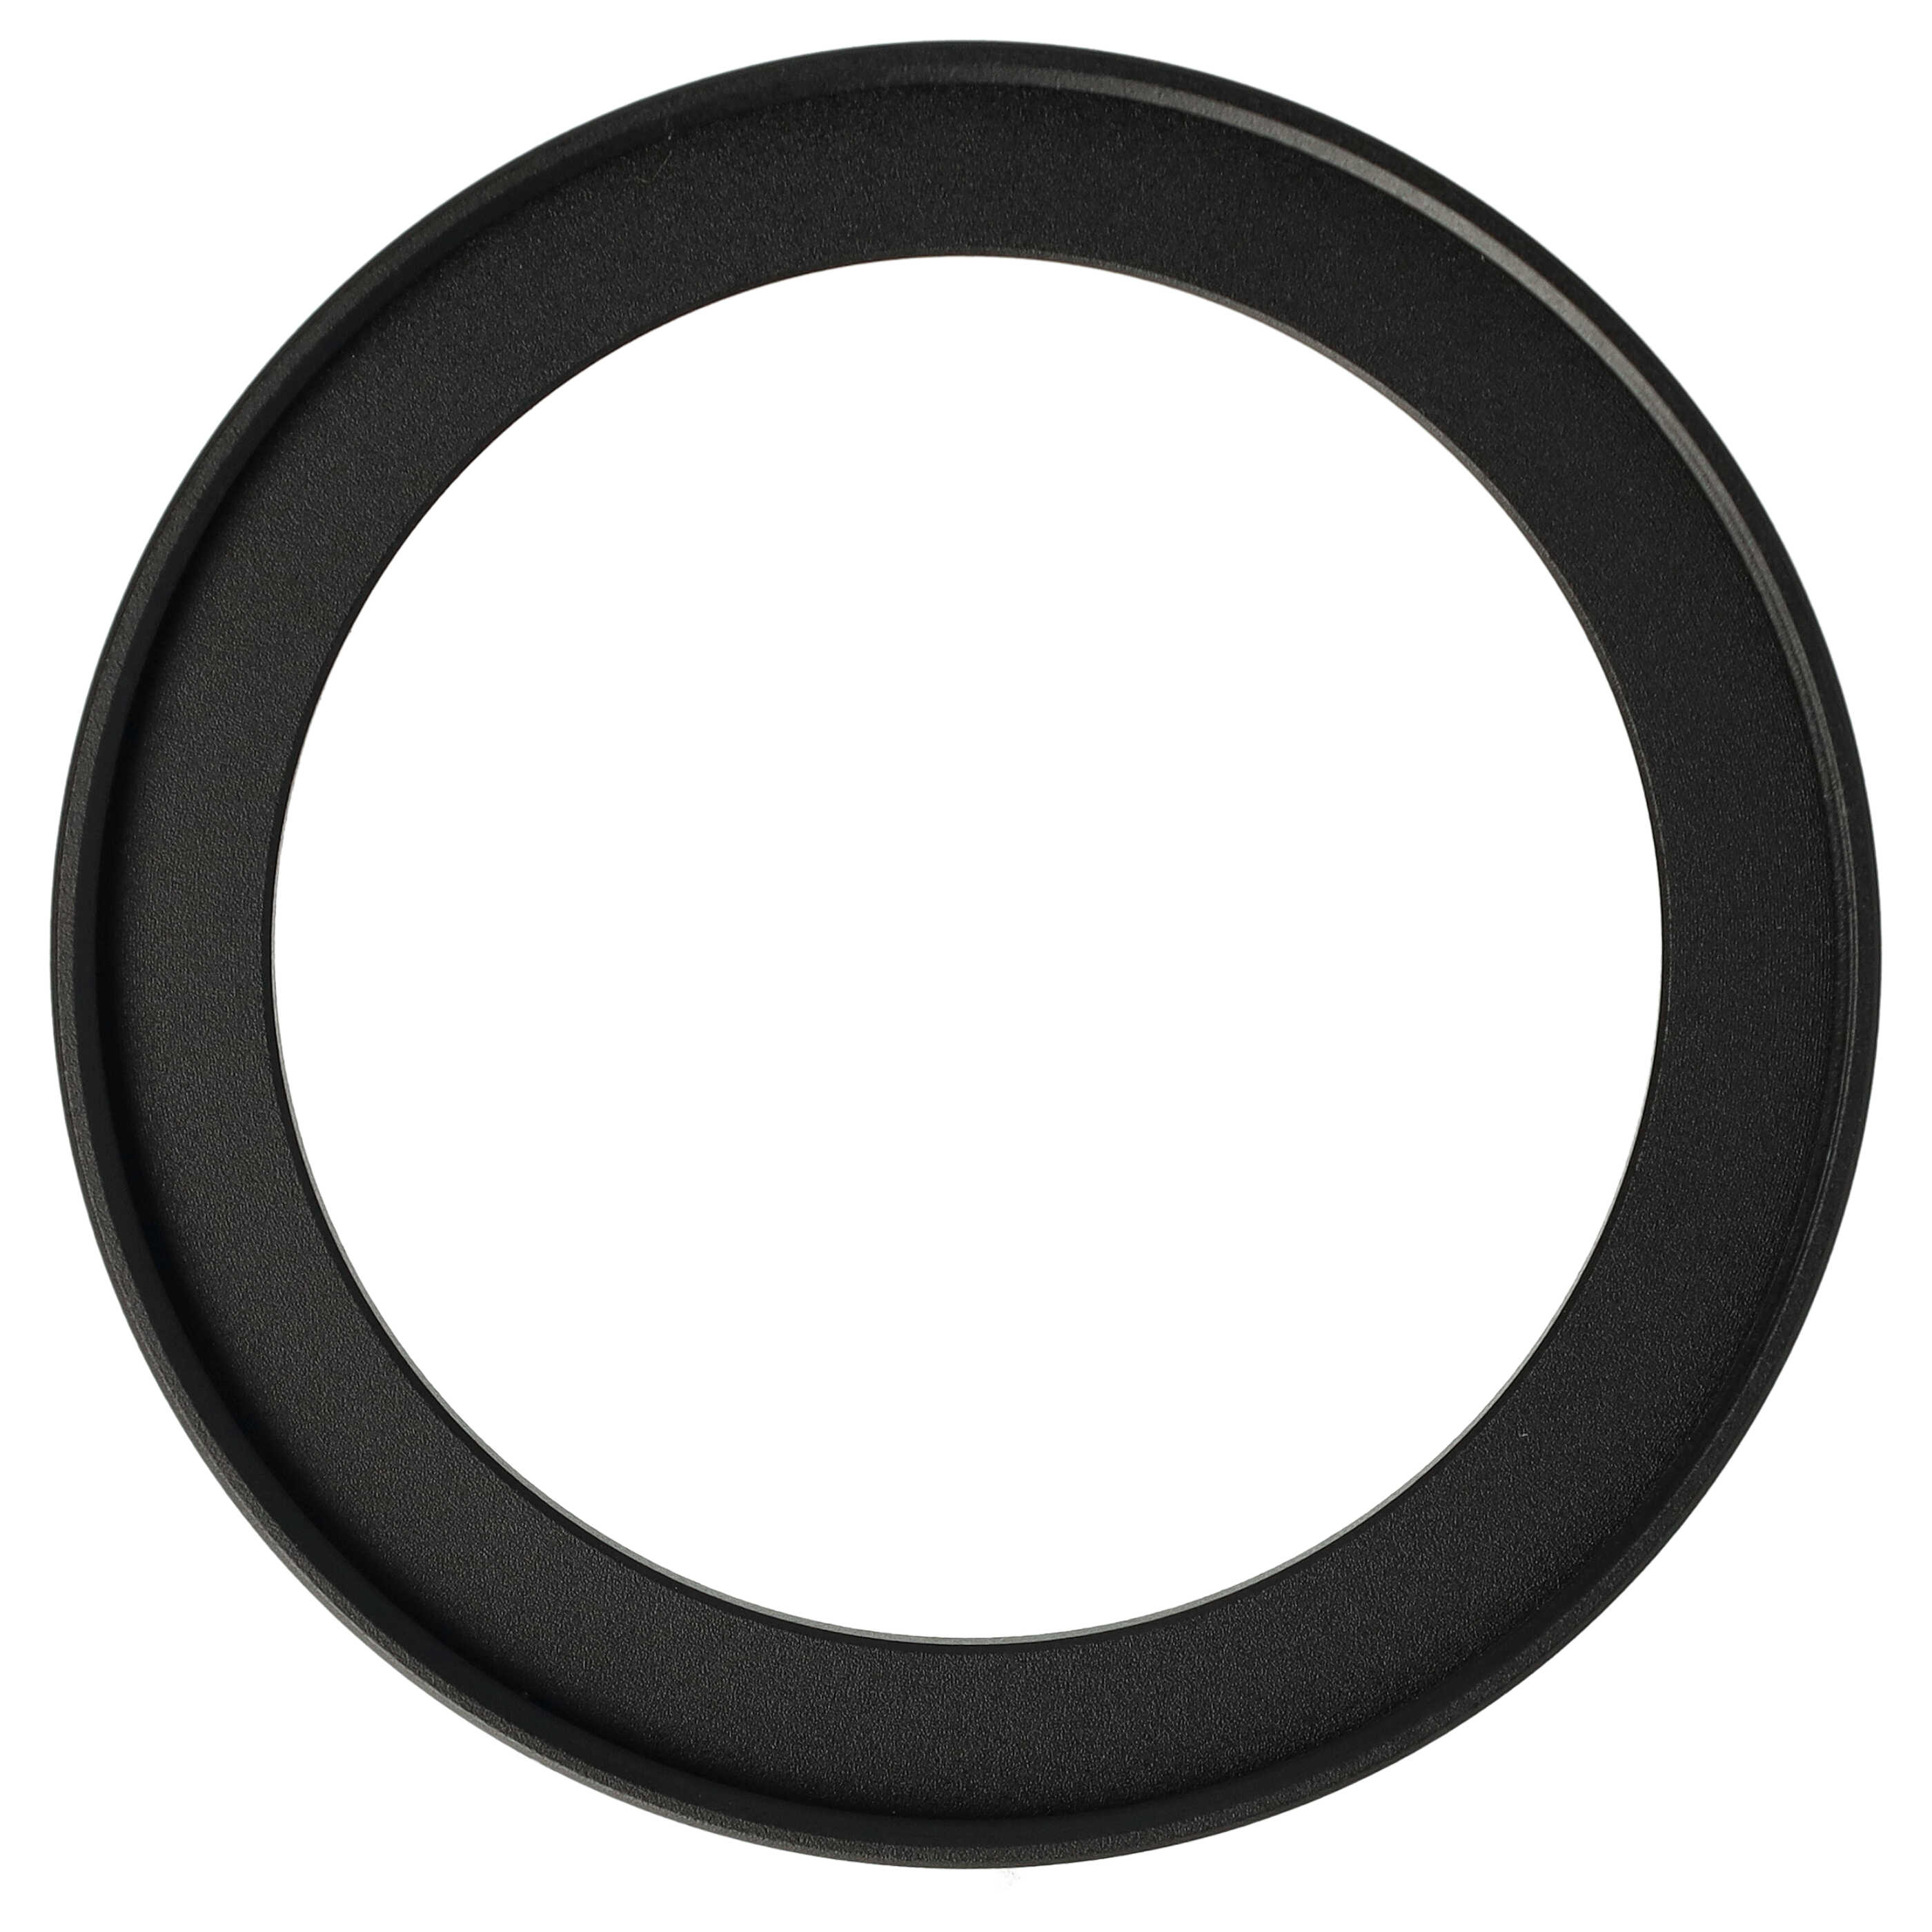 Step-Up Ring Adapter of 49 mm to 58 mmfor various Camera Lens - Filter Adapter